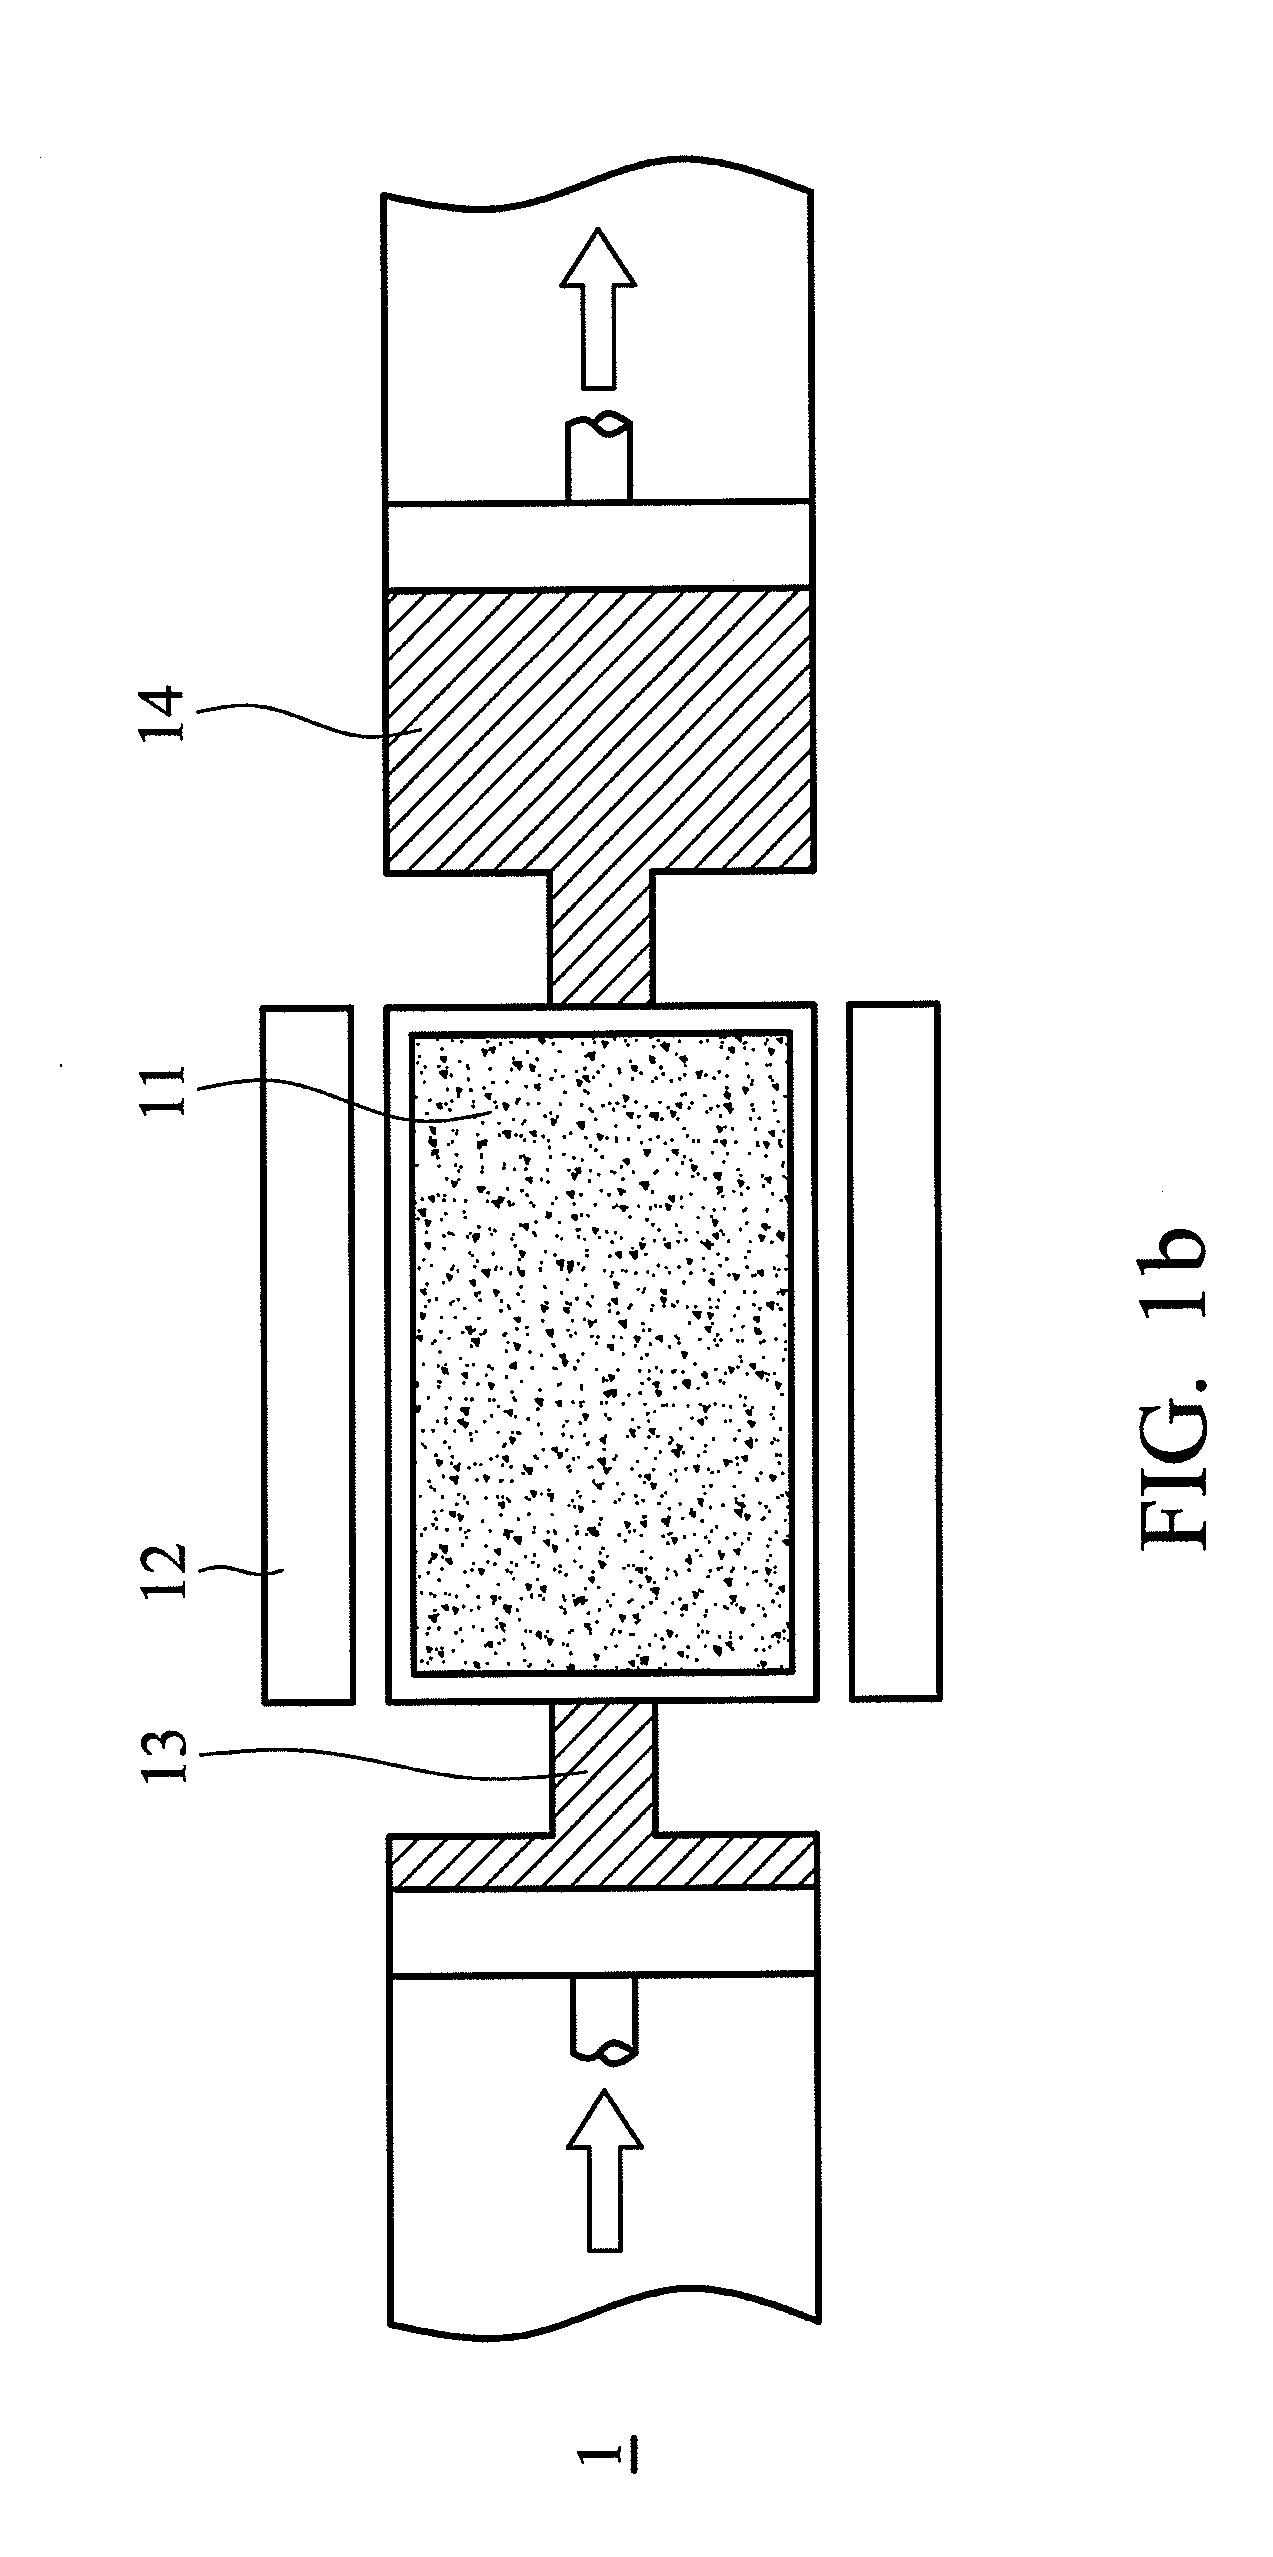 Thermal exchanging device